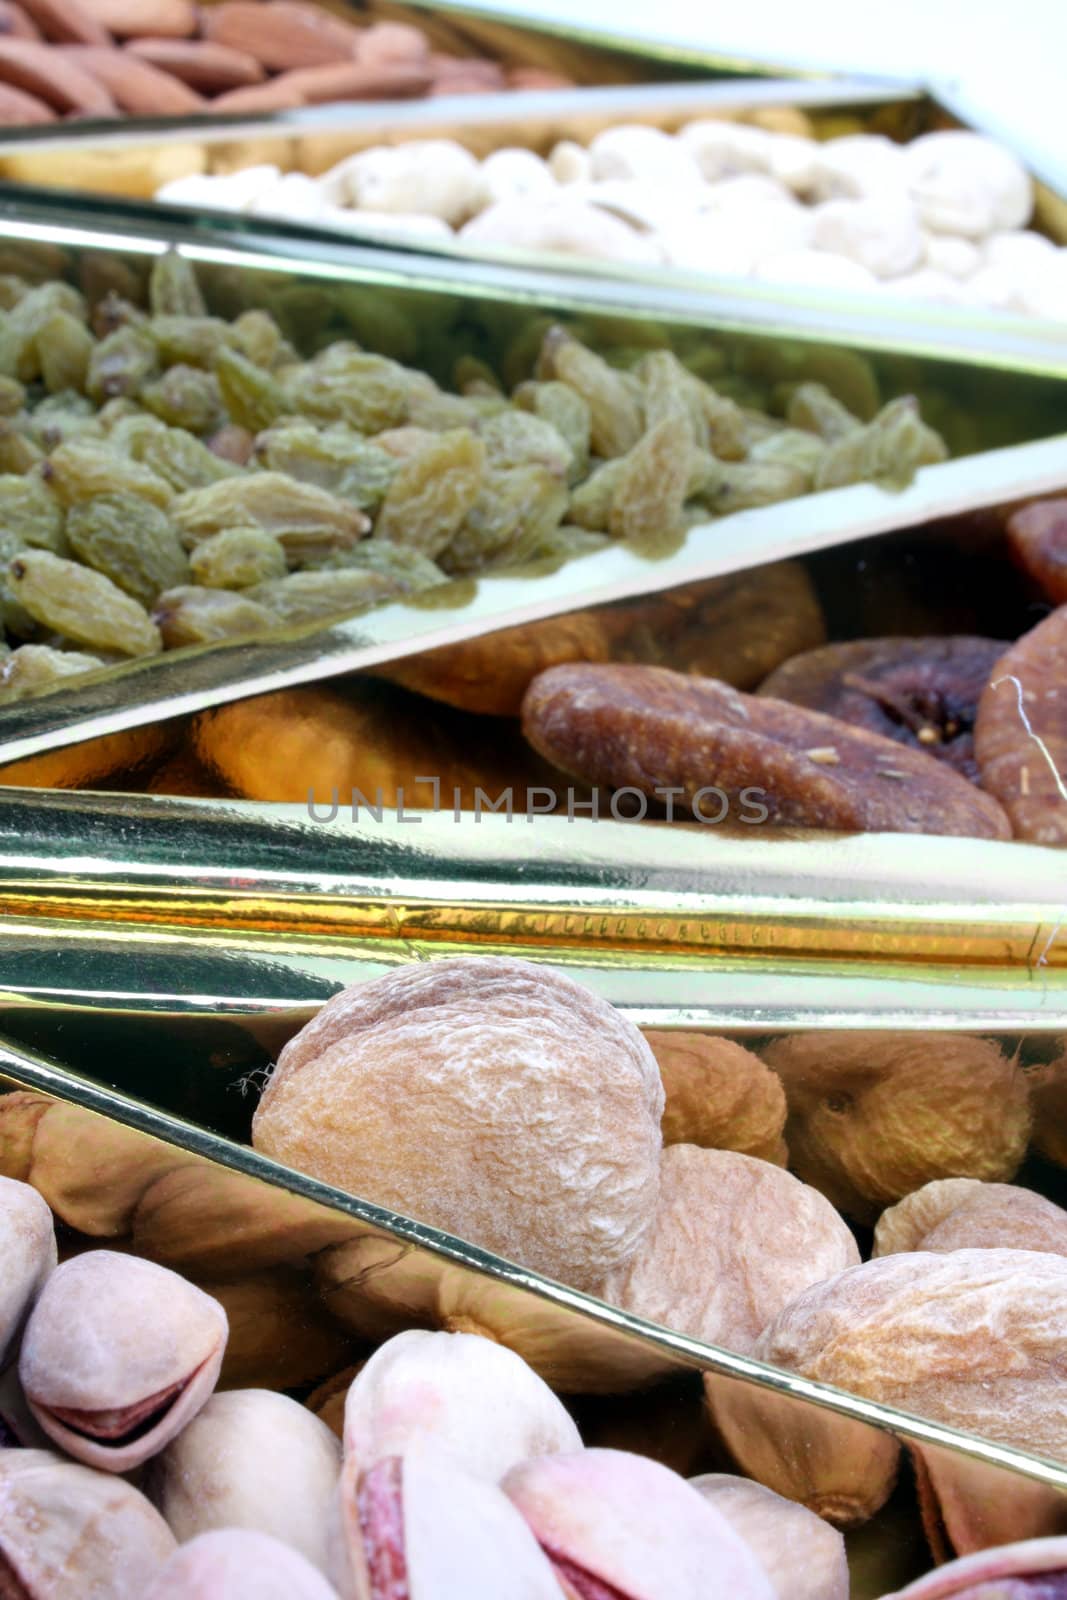 A box containing nutritious dry-fruits.